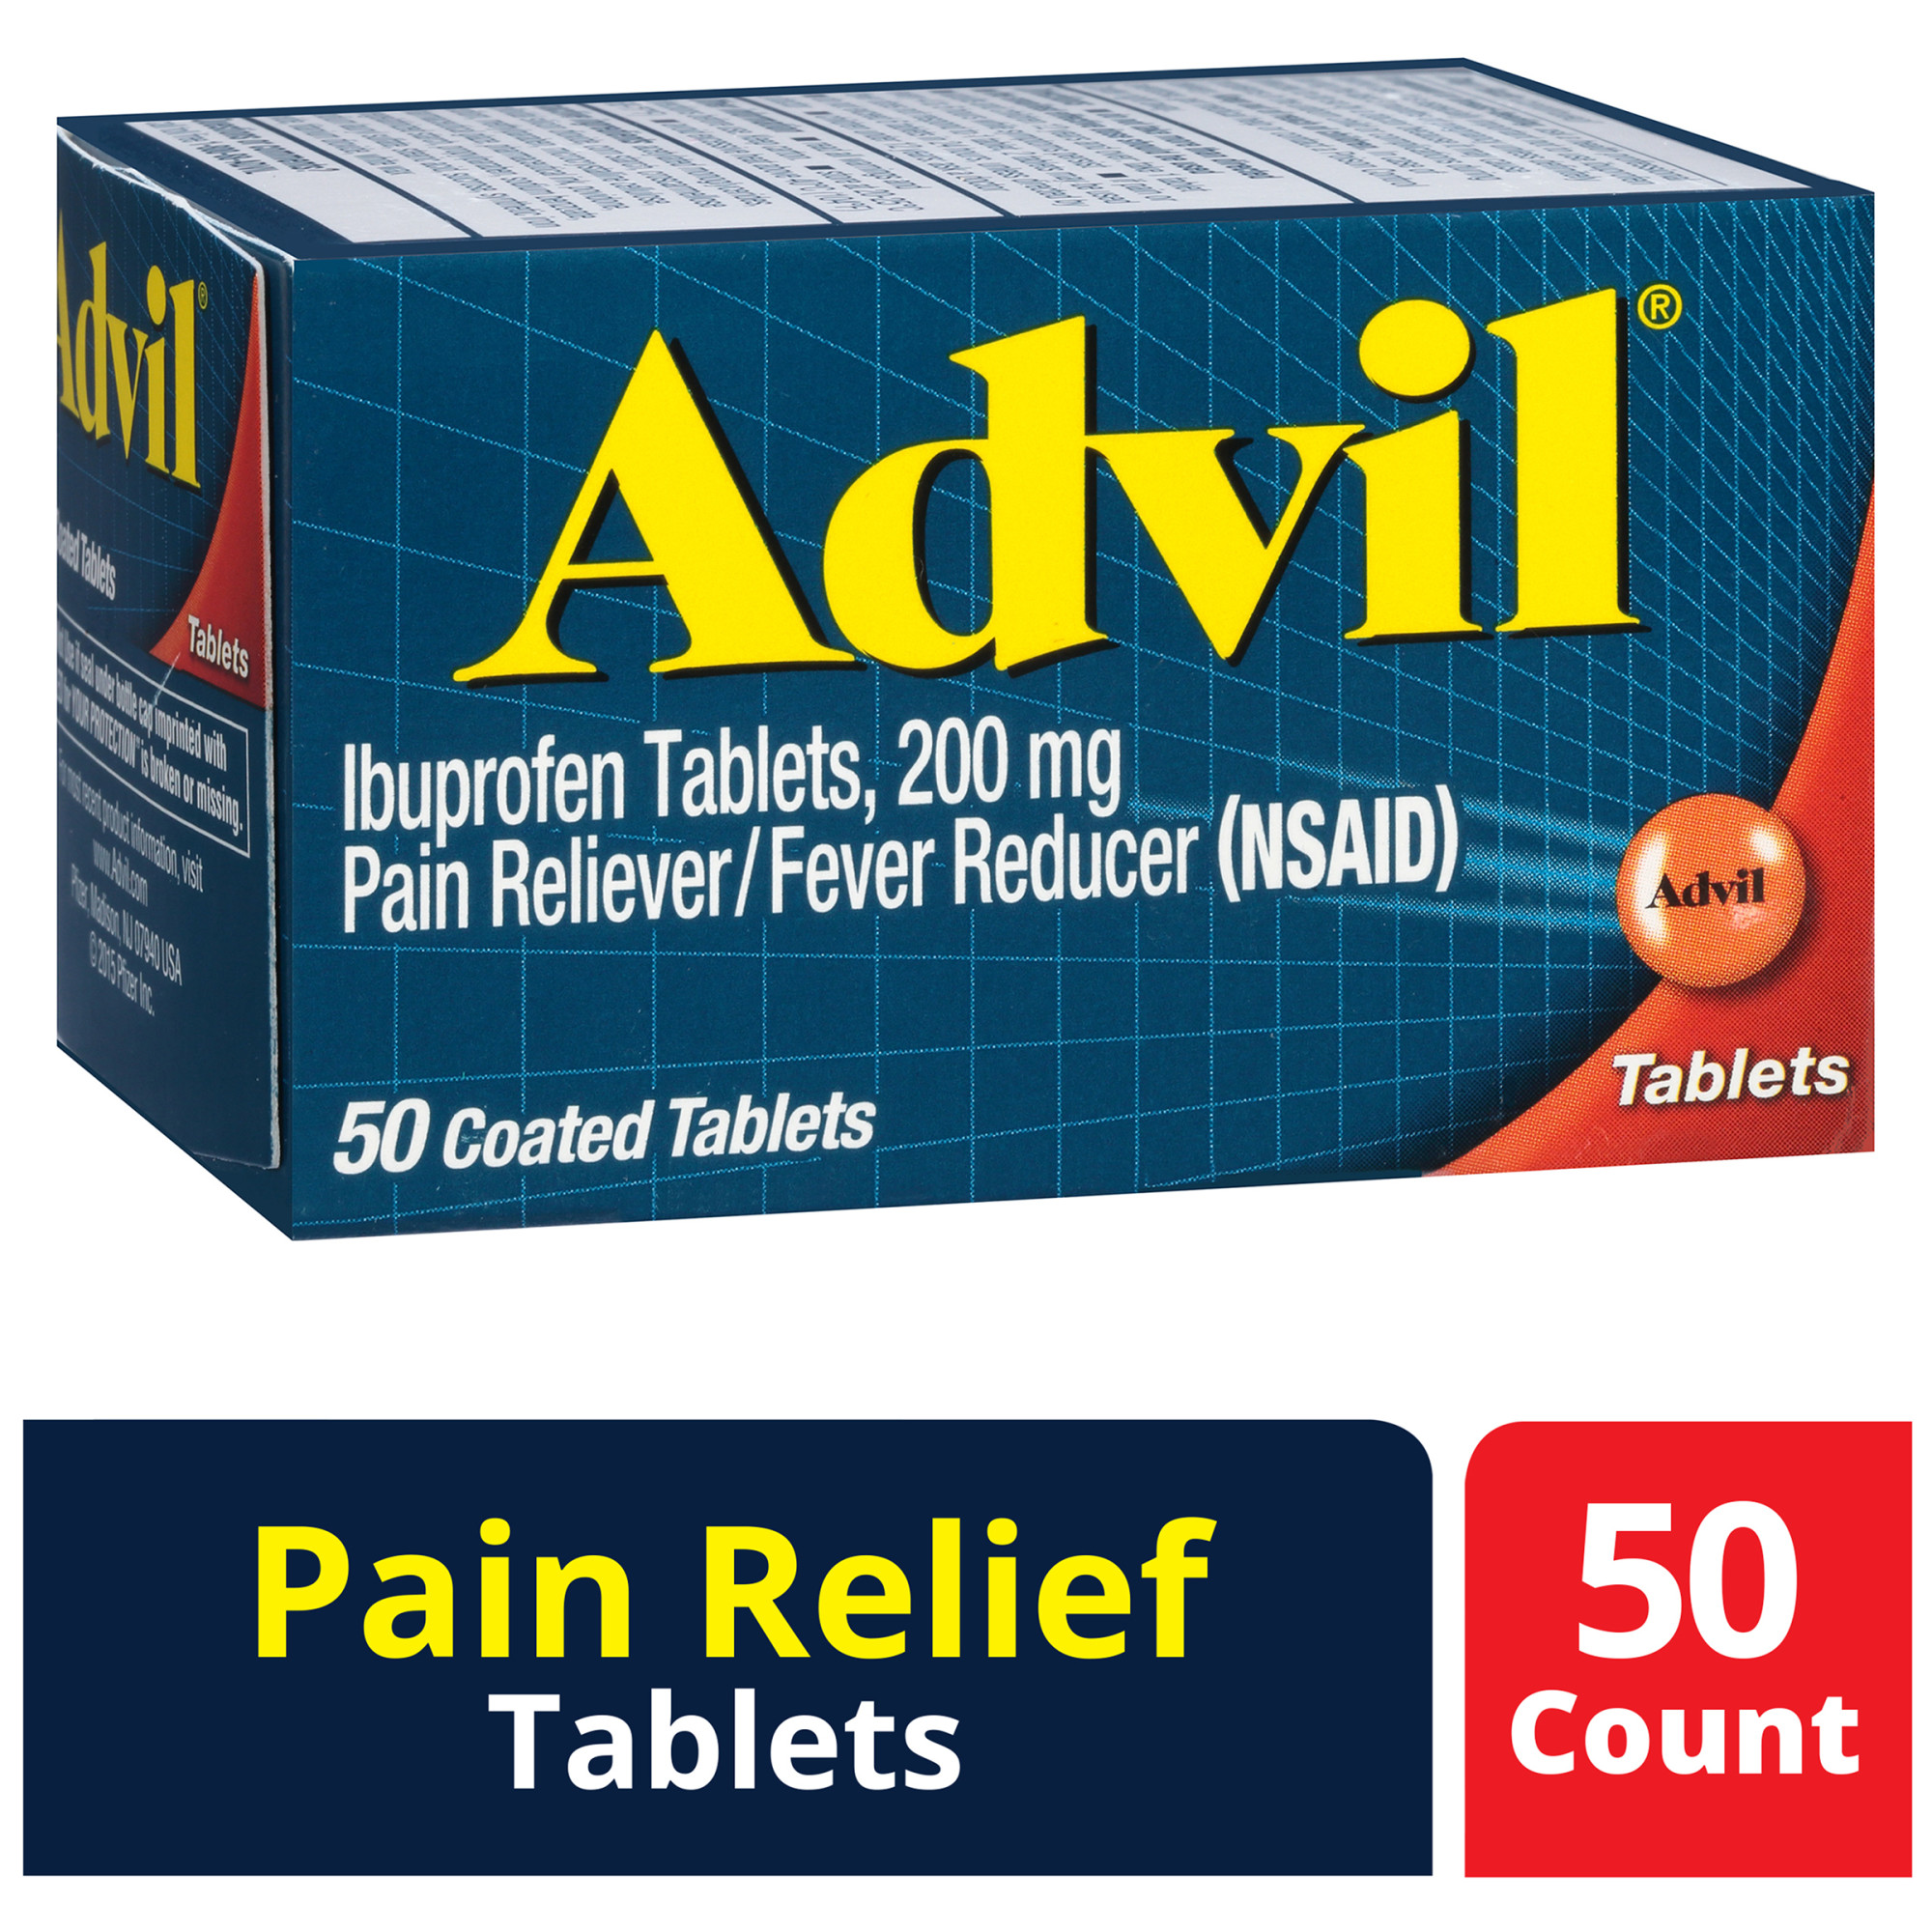 Advil Pain Relievers and Fever Reducer Coated Tablets, 200 Mg Ibuprofen, 50 Count - image 1 of 9